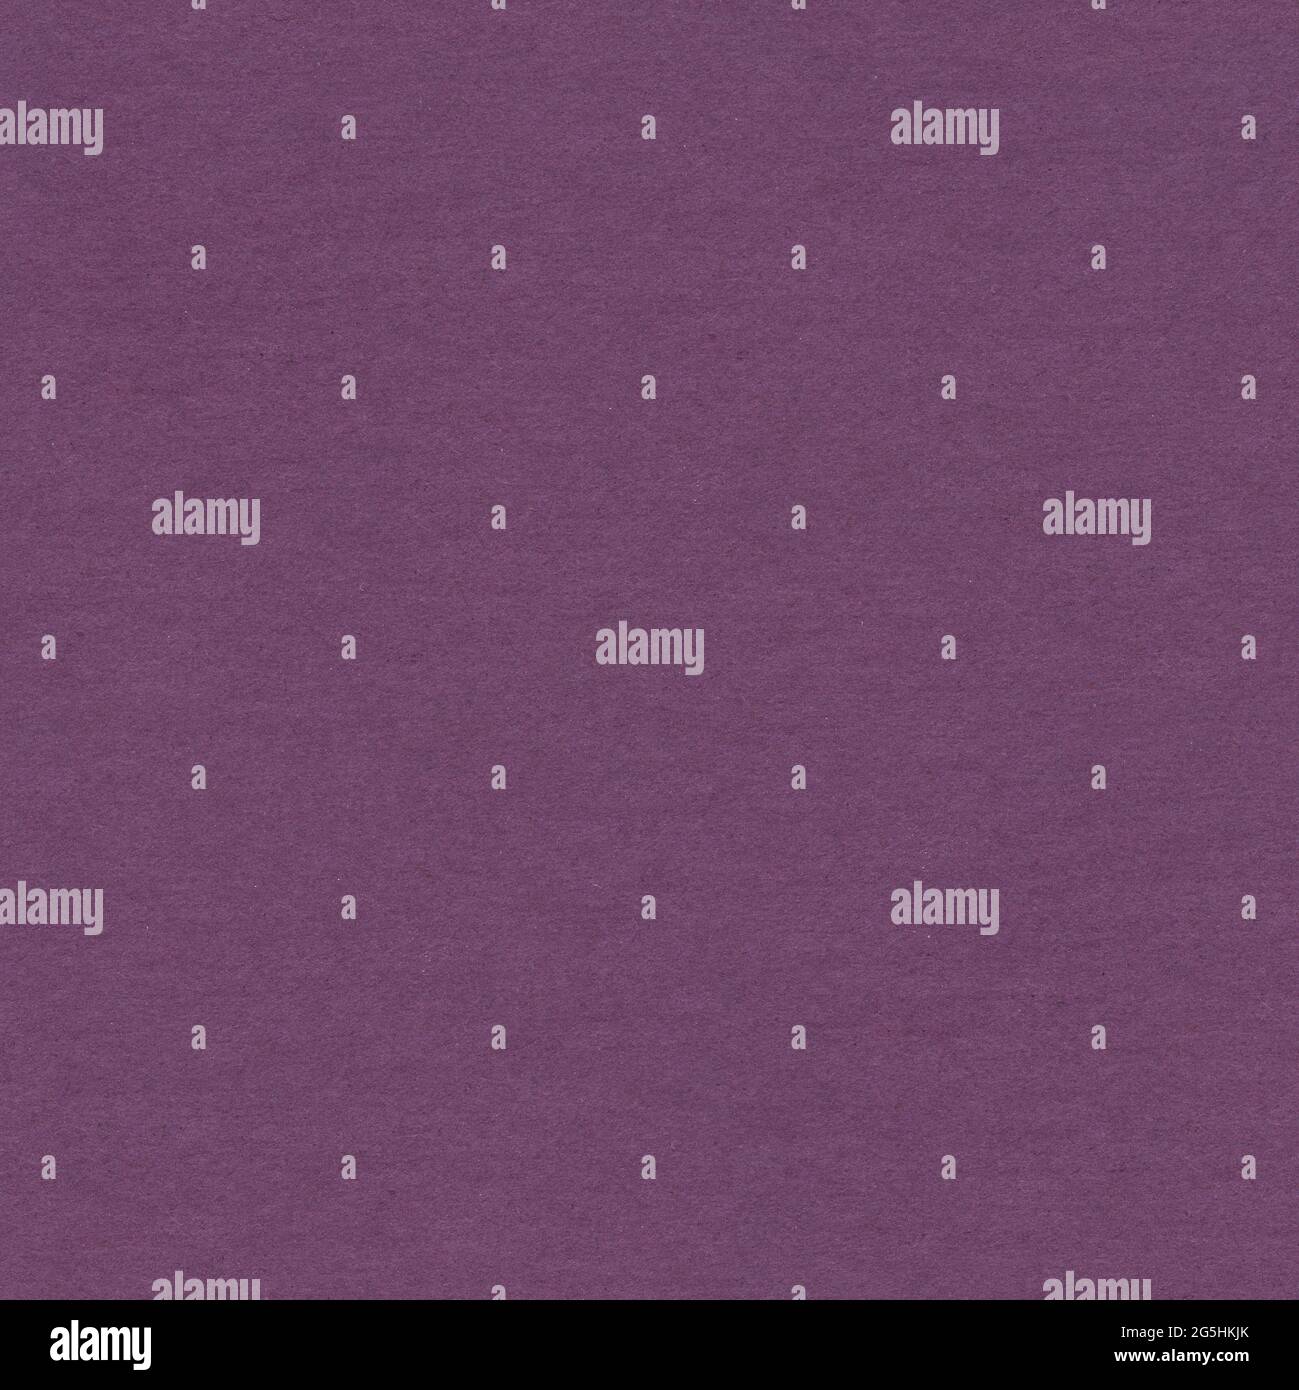 Purple paper background with pattern. Seamless square texture, tile ready. Stock Photo